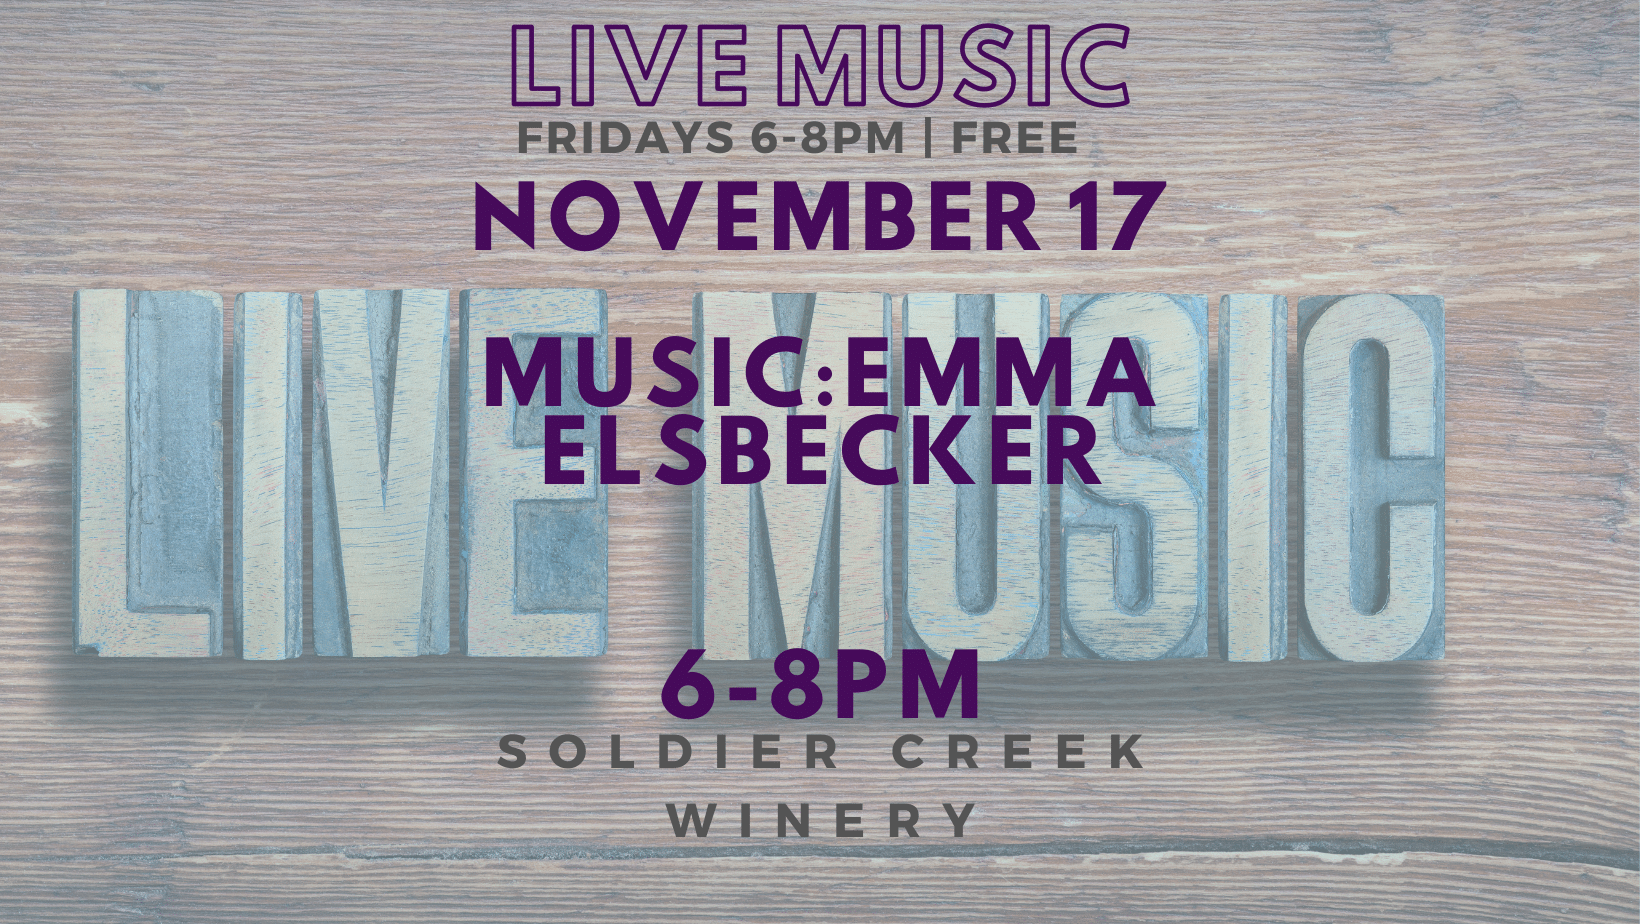 live music at soldier creek winery every friday, november 17 is emma elsbecker from 6-8pm. free to listen!